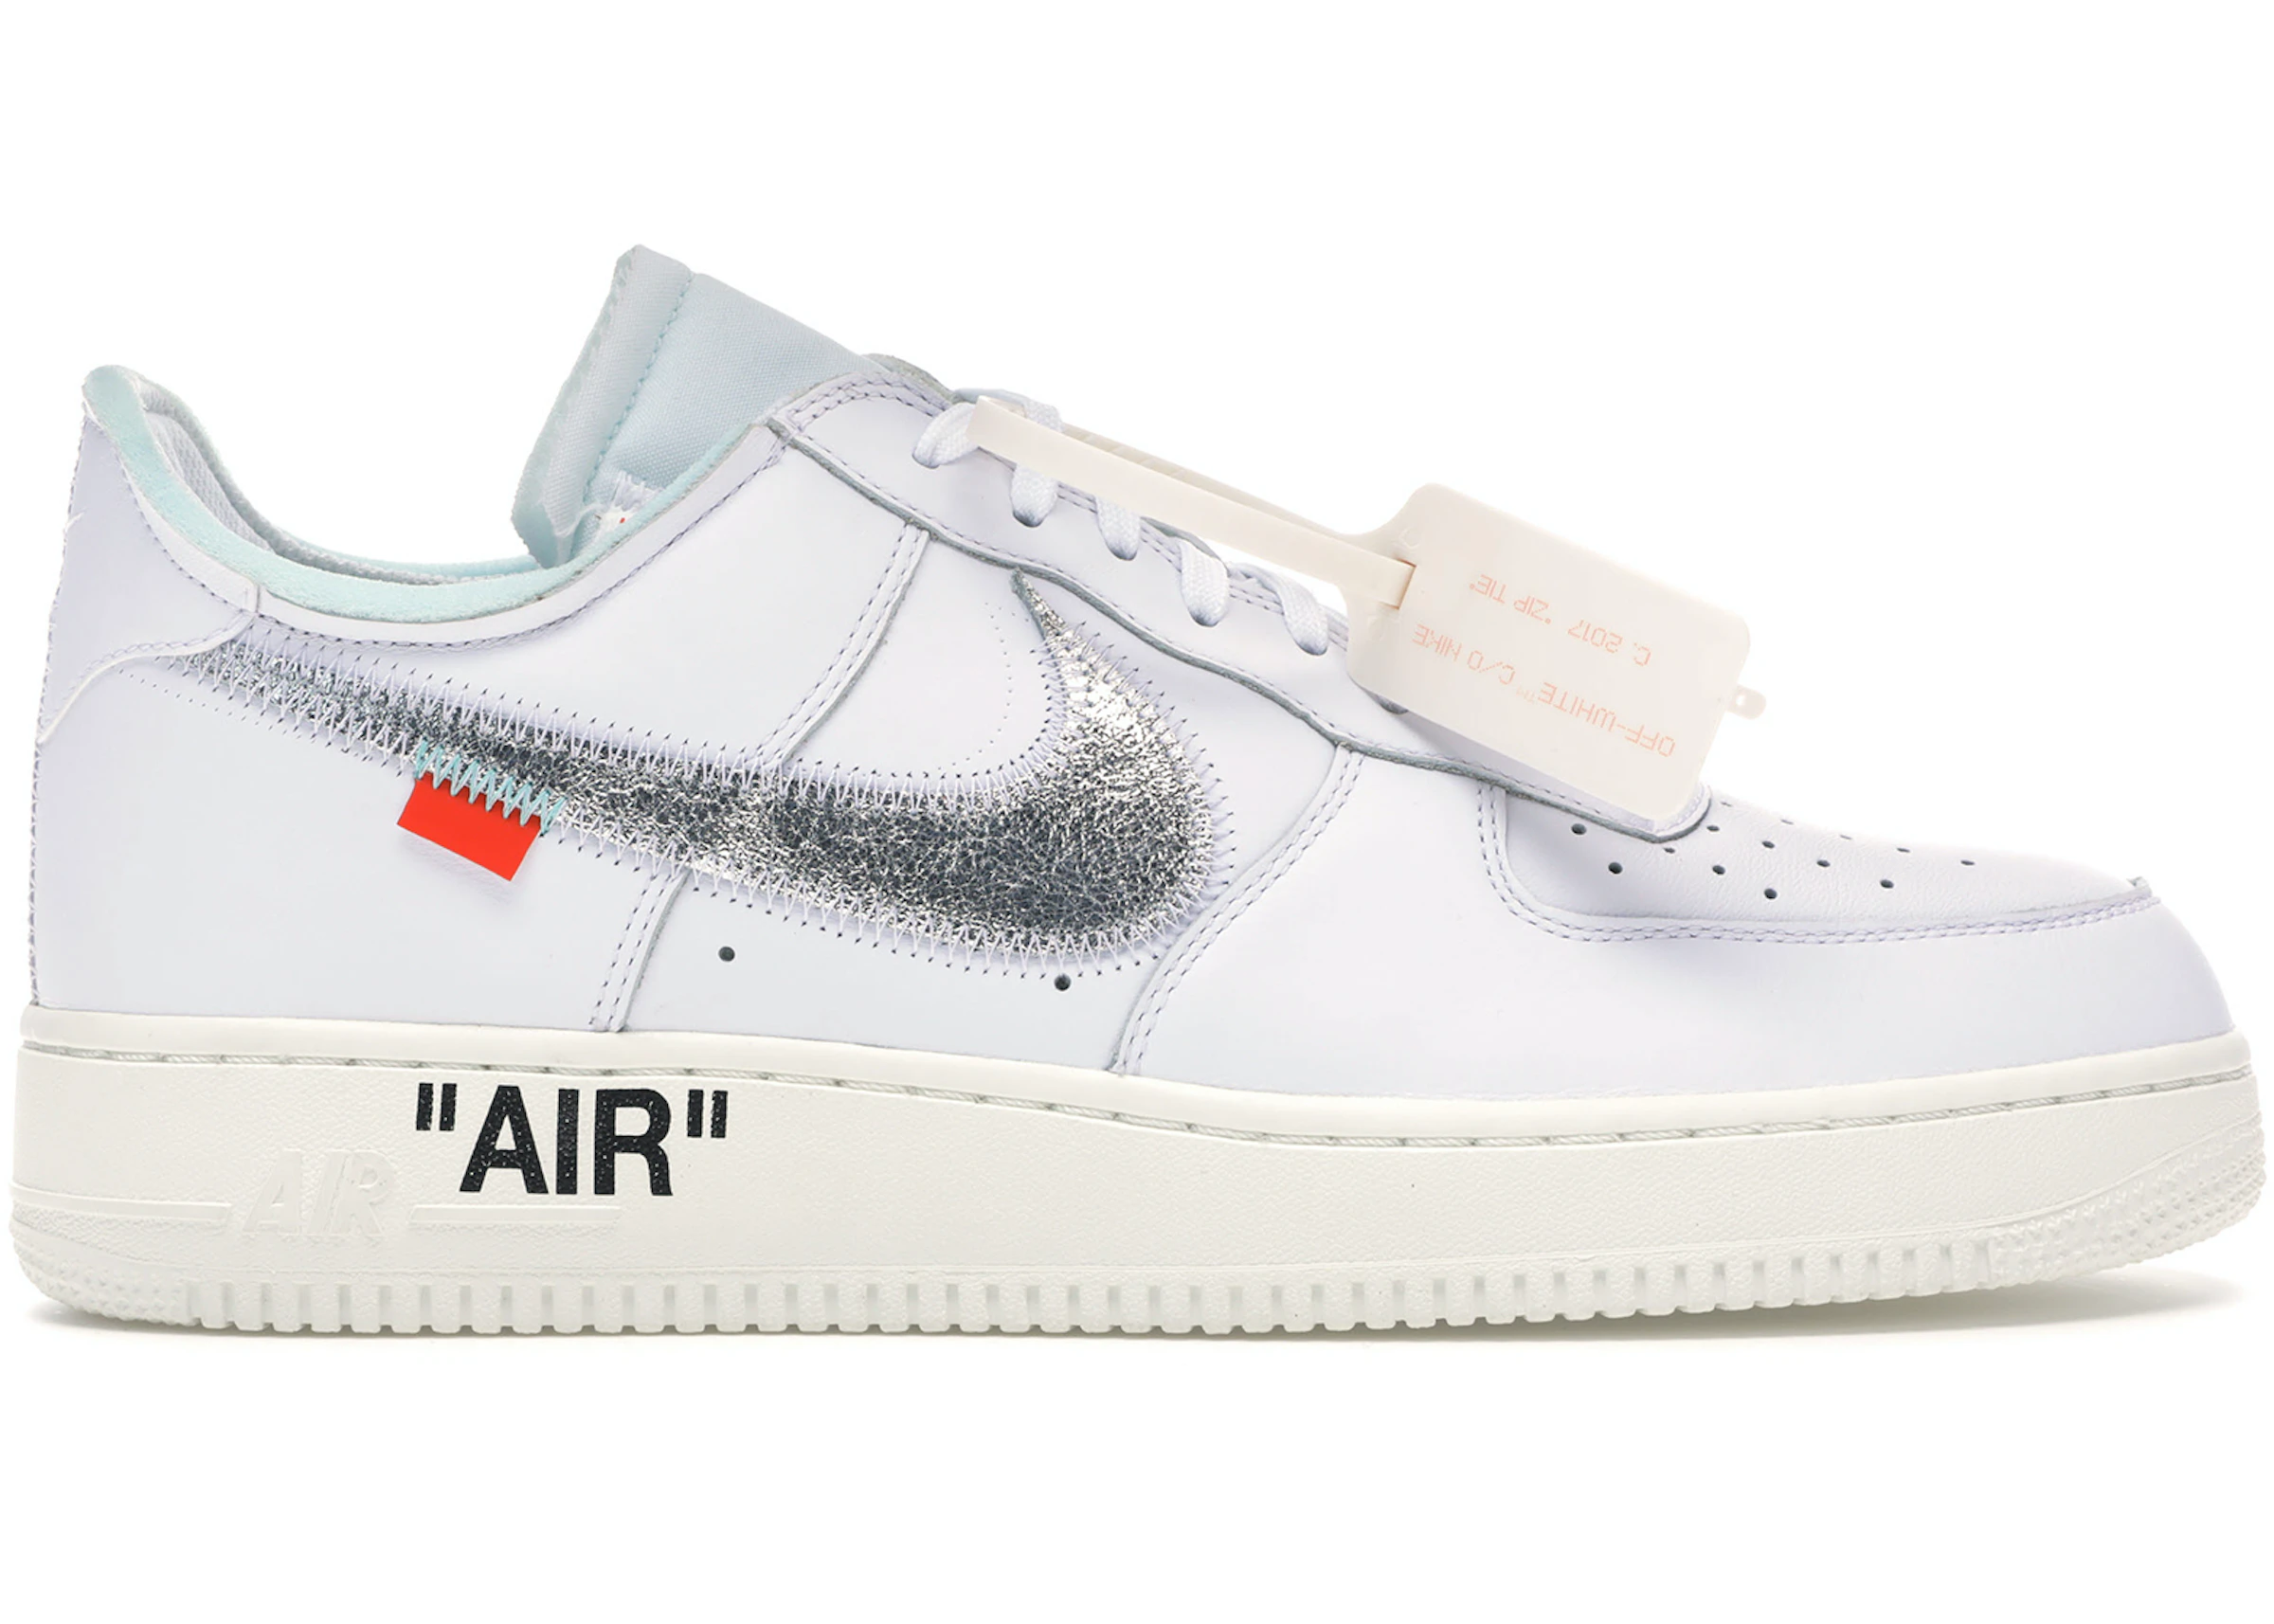 Buy Nike off white air force 1 volt Air Force Shoes & New Sneakers - StockX